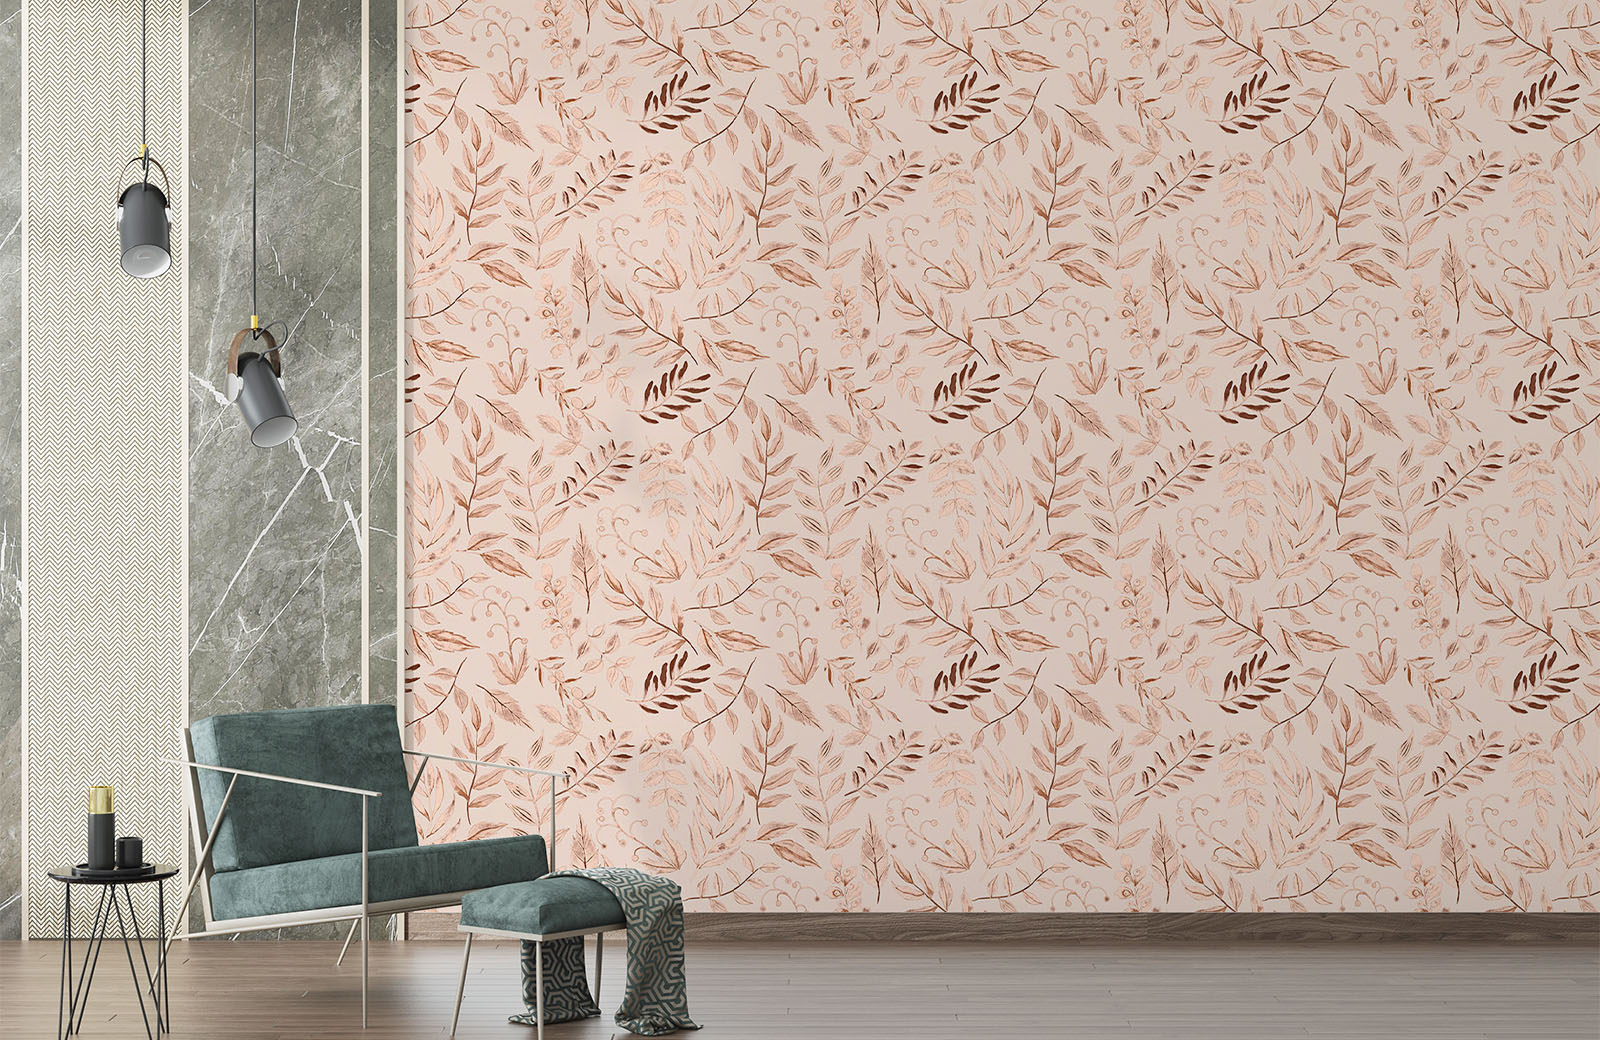 watercolour-leaf-branches-in-peach-wallpaper-with-chair